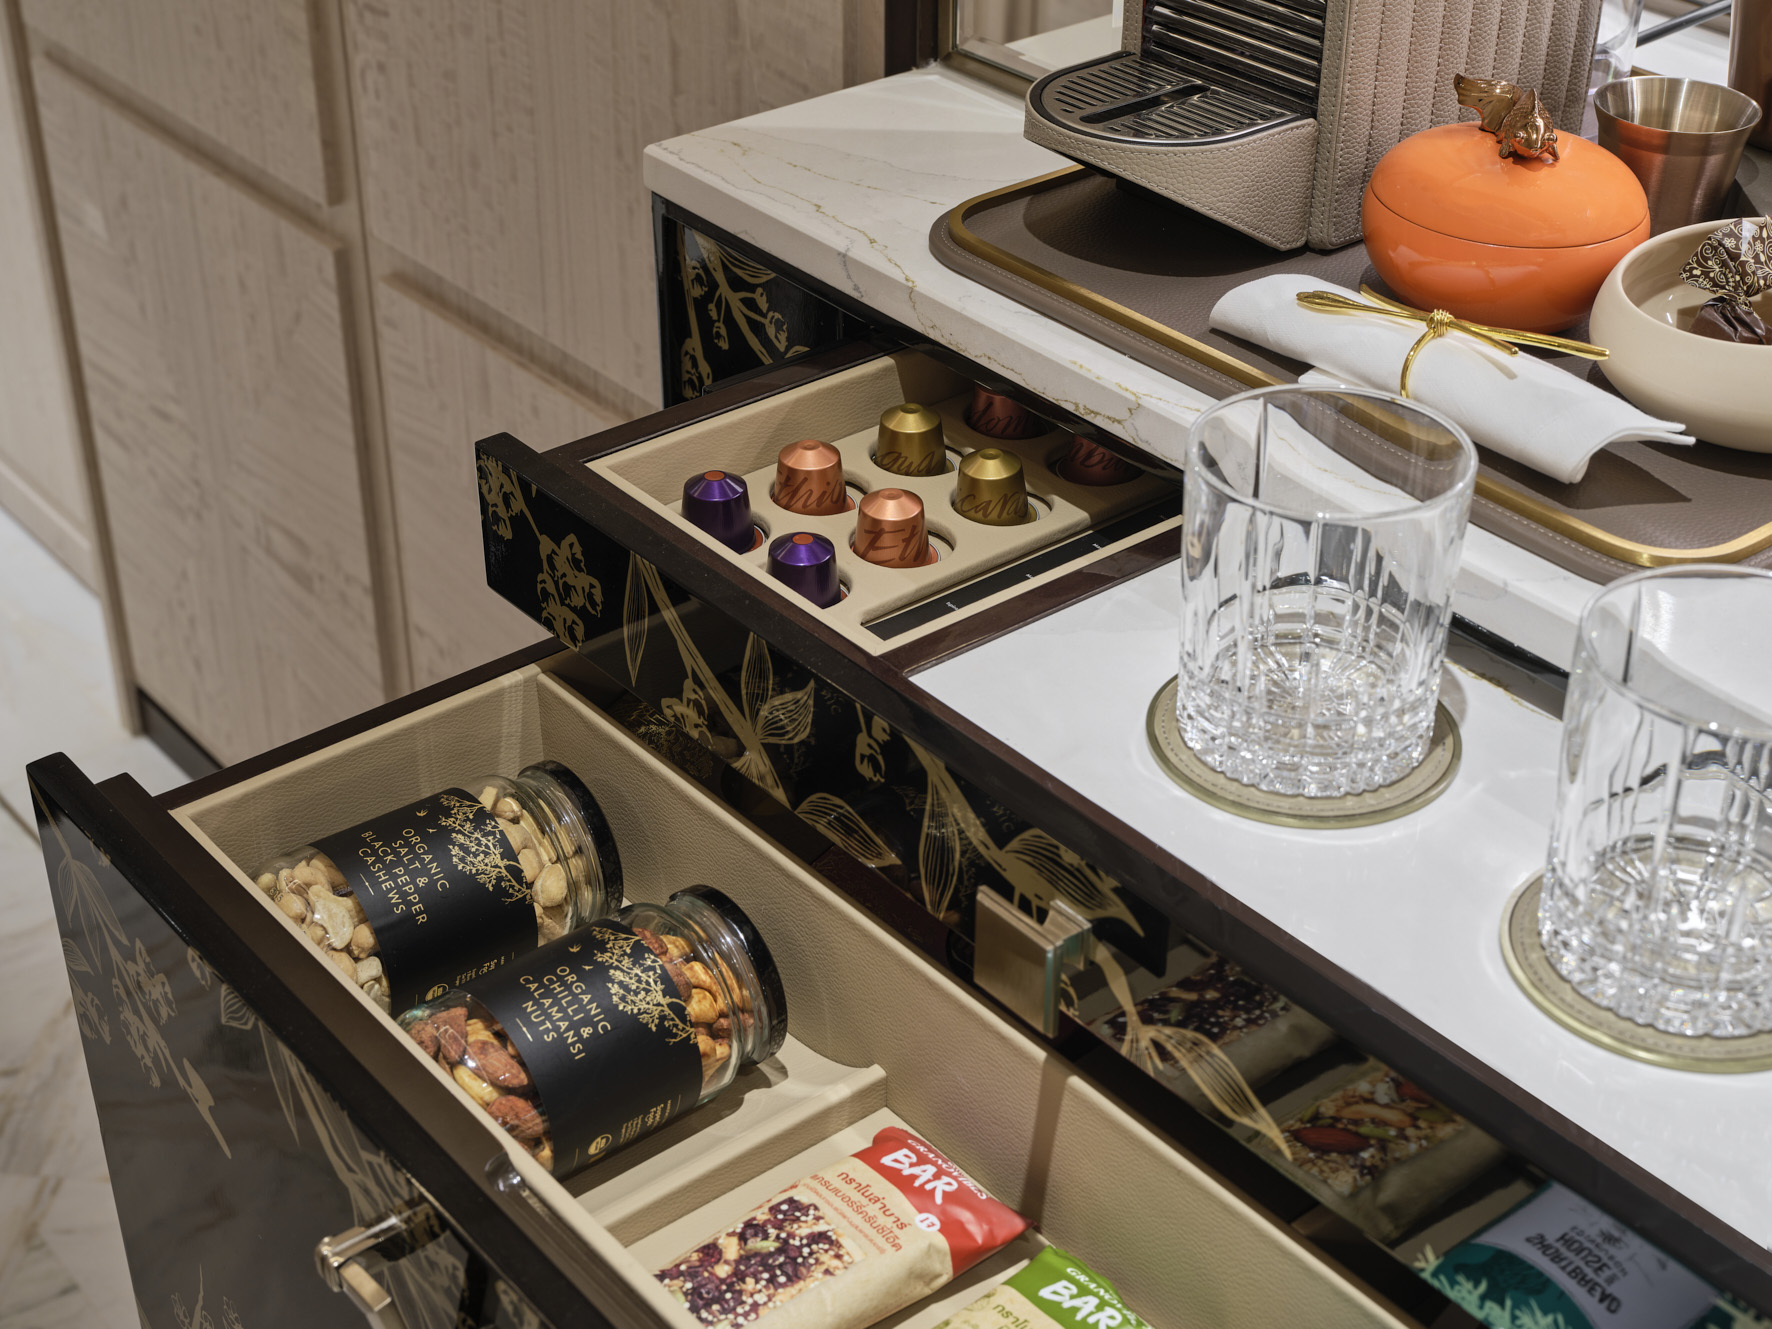 Selection of coffee, specialty tea and snacks in the Armoire